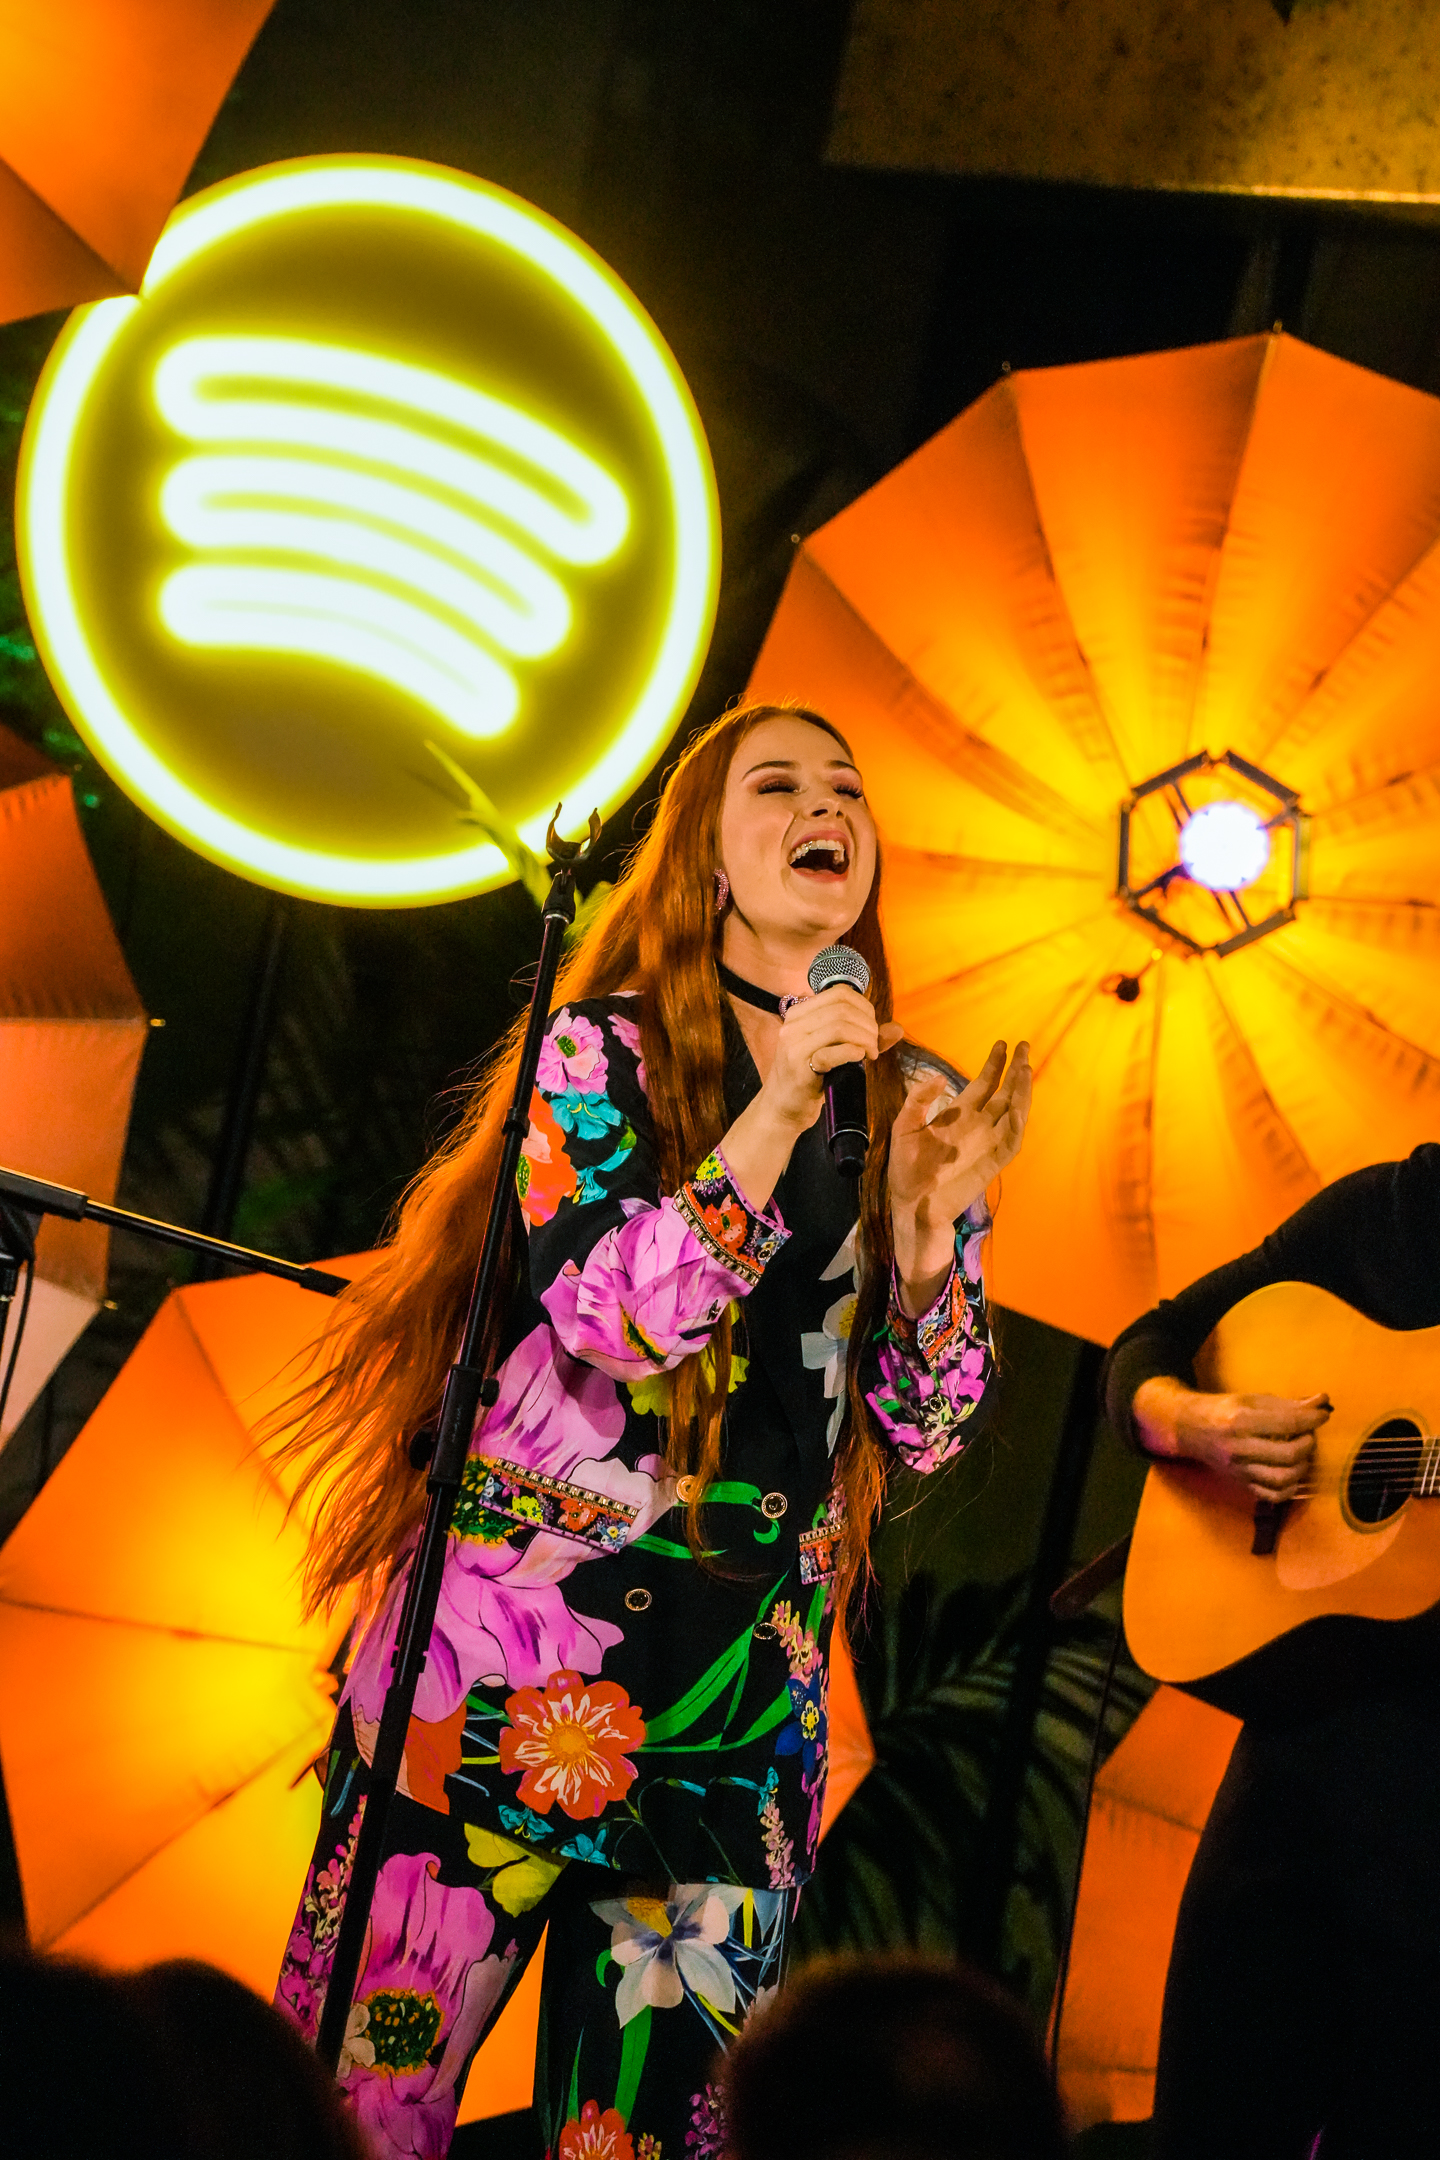 Singer, Vera Blue, holding a microphone and singing at a Spotify supper. She is wearing a colorful pantsuit with a pink floral pattern